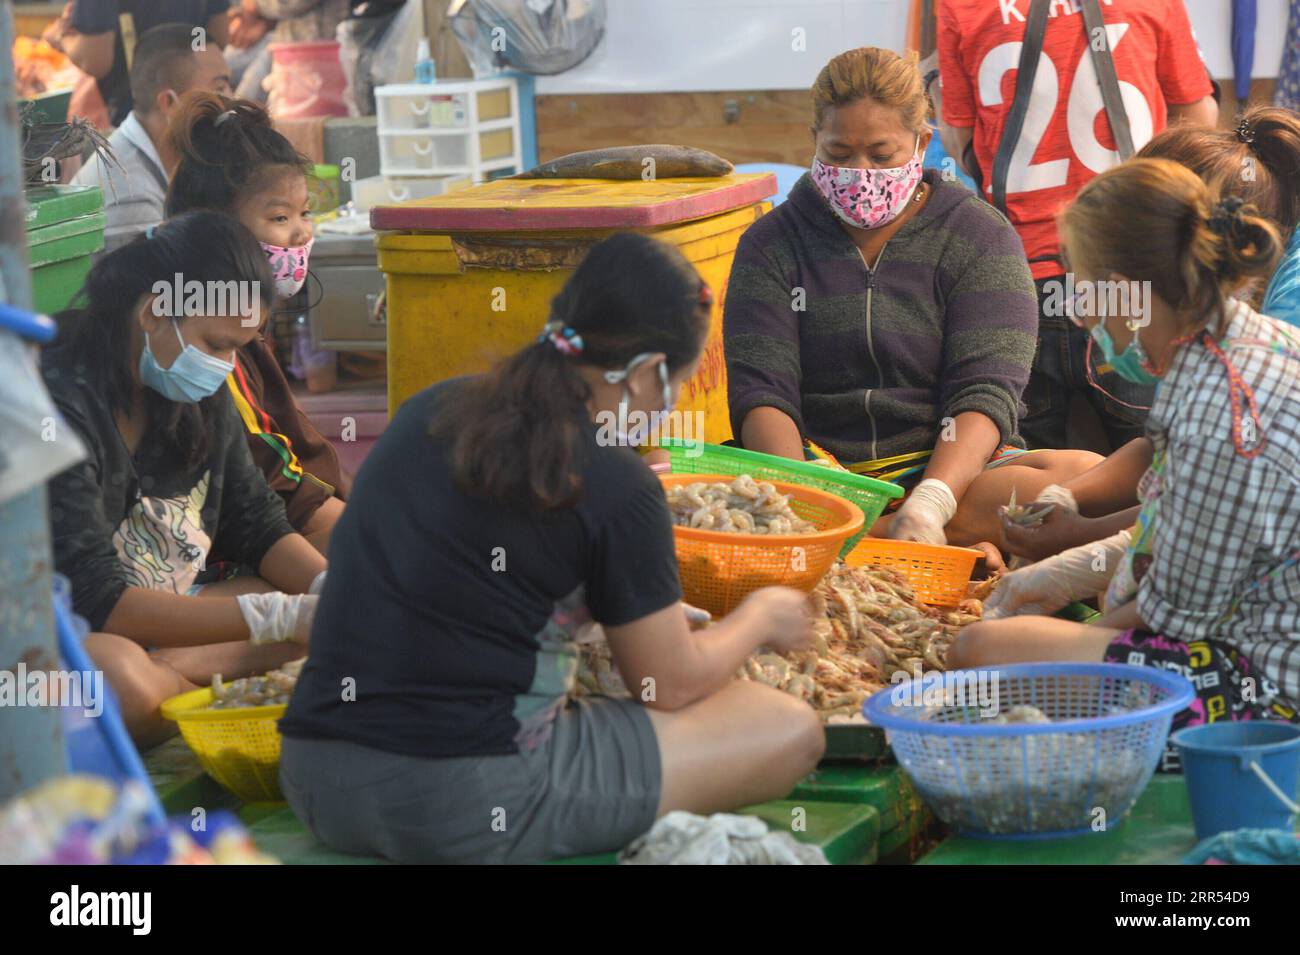 201222 -- BANGKOK, Dec. 22, 2020 -- Workers clean shrimps in a market in Samut Sakhon province, Thailand, Dec. 21, 2020. Thailand on Monday reported 382 more confirmed cases of coronavirus infection, according to the Center for the COVID-19 Situation Administration CCSA. Of the total, 360 were Myanmar migrant workers, who have tested positive at mobile testing units conducted by public health officials in Samut Sakhon province, where the latest COVID-19 outbreak originated.  THAILAND-SAMUT SAKHON-COVID-19-OUTBREAK RachenxSageamsak PUBLICATIONxNOTxINxCHN Stock Photo